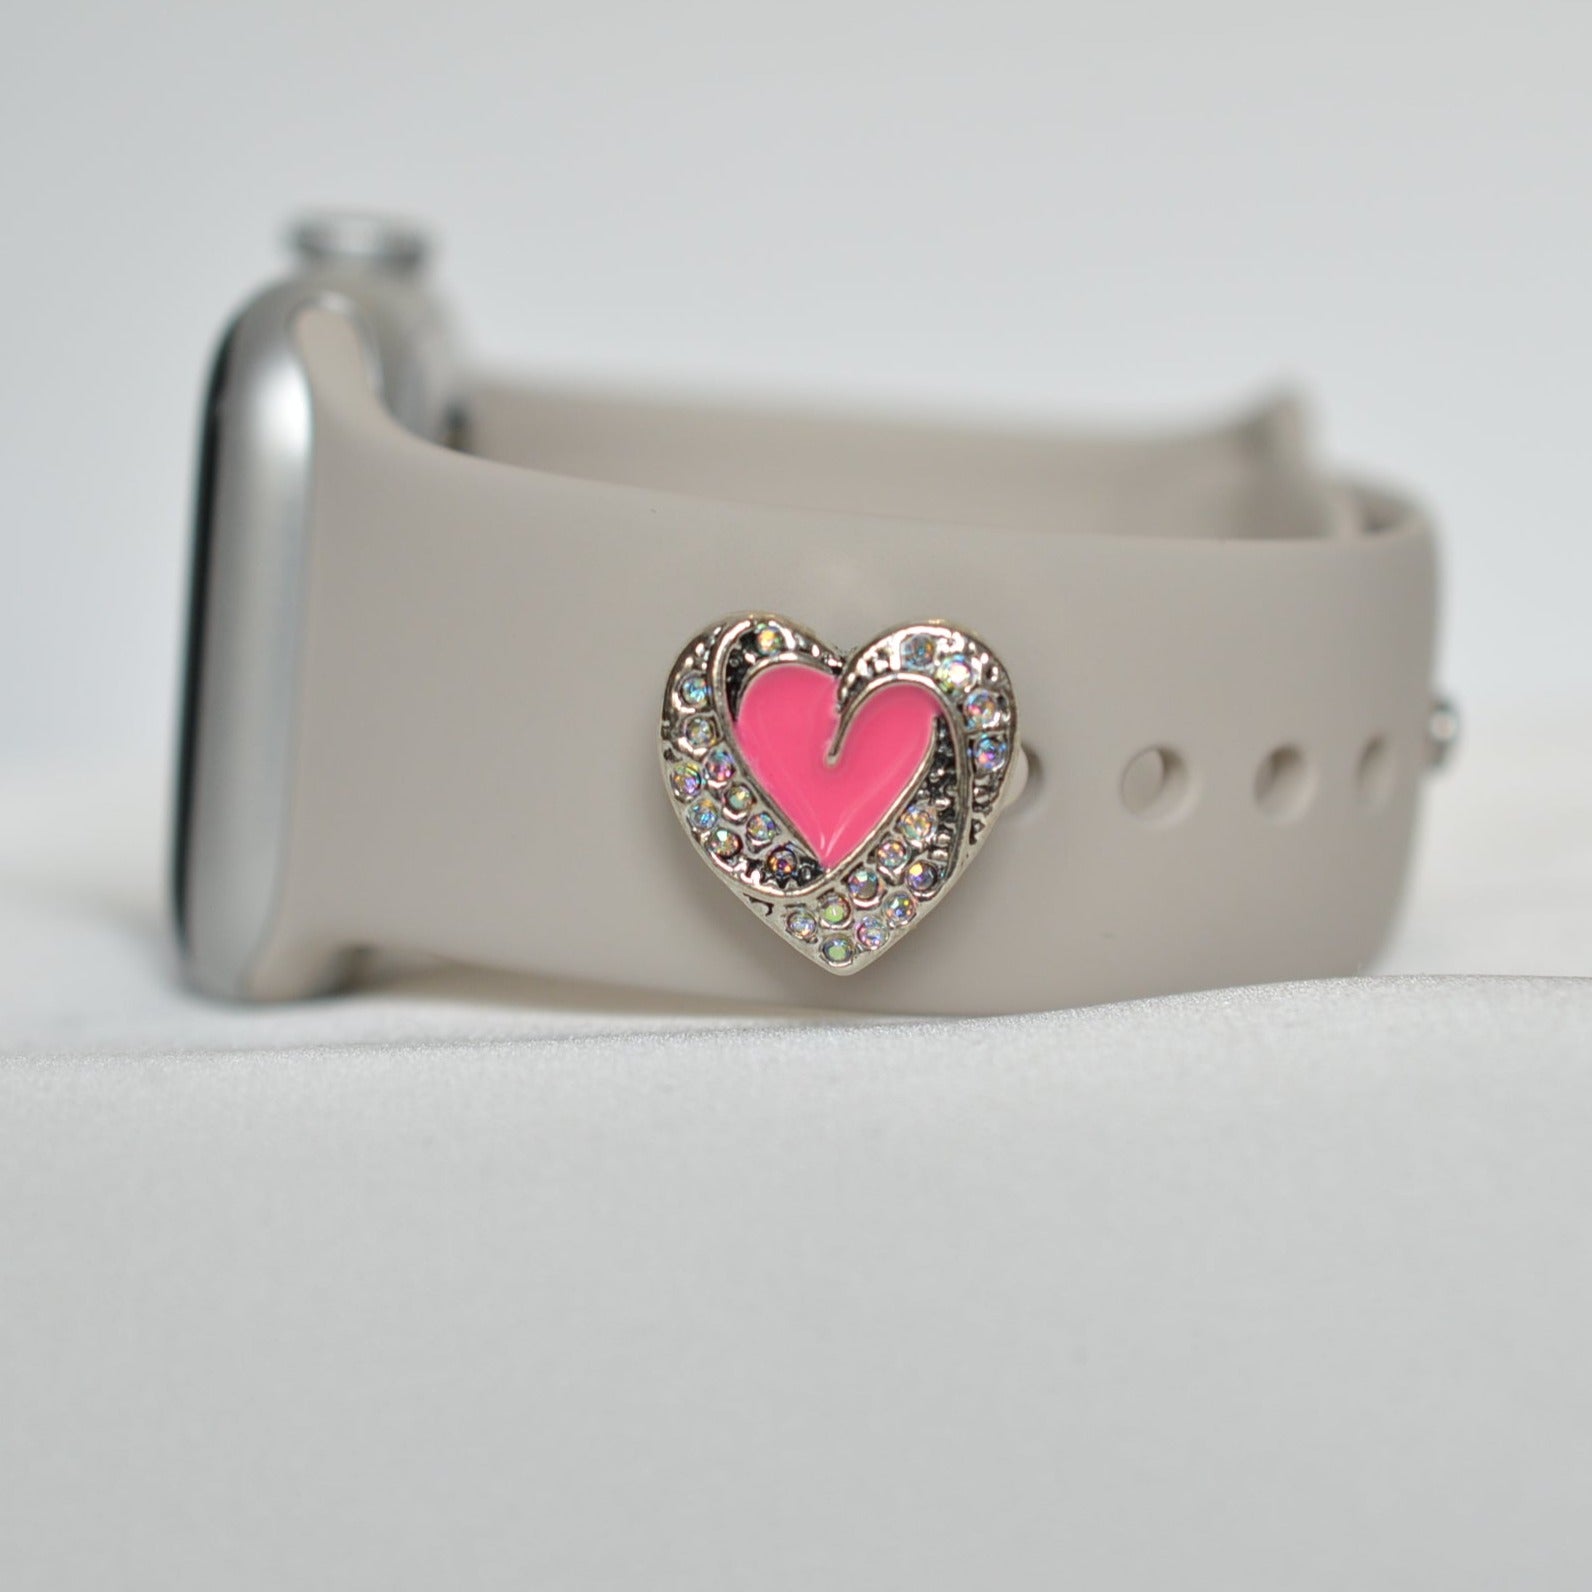 Pink Heart Charm for Belts, Bags and Watch Bands